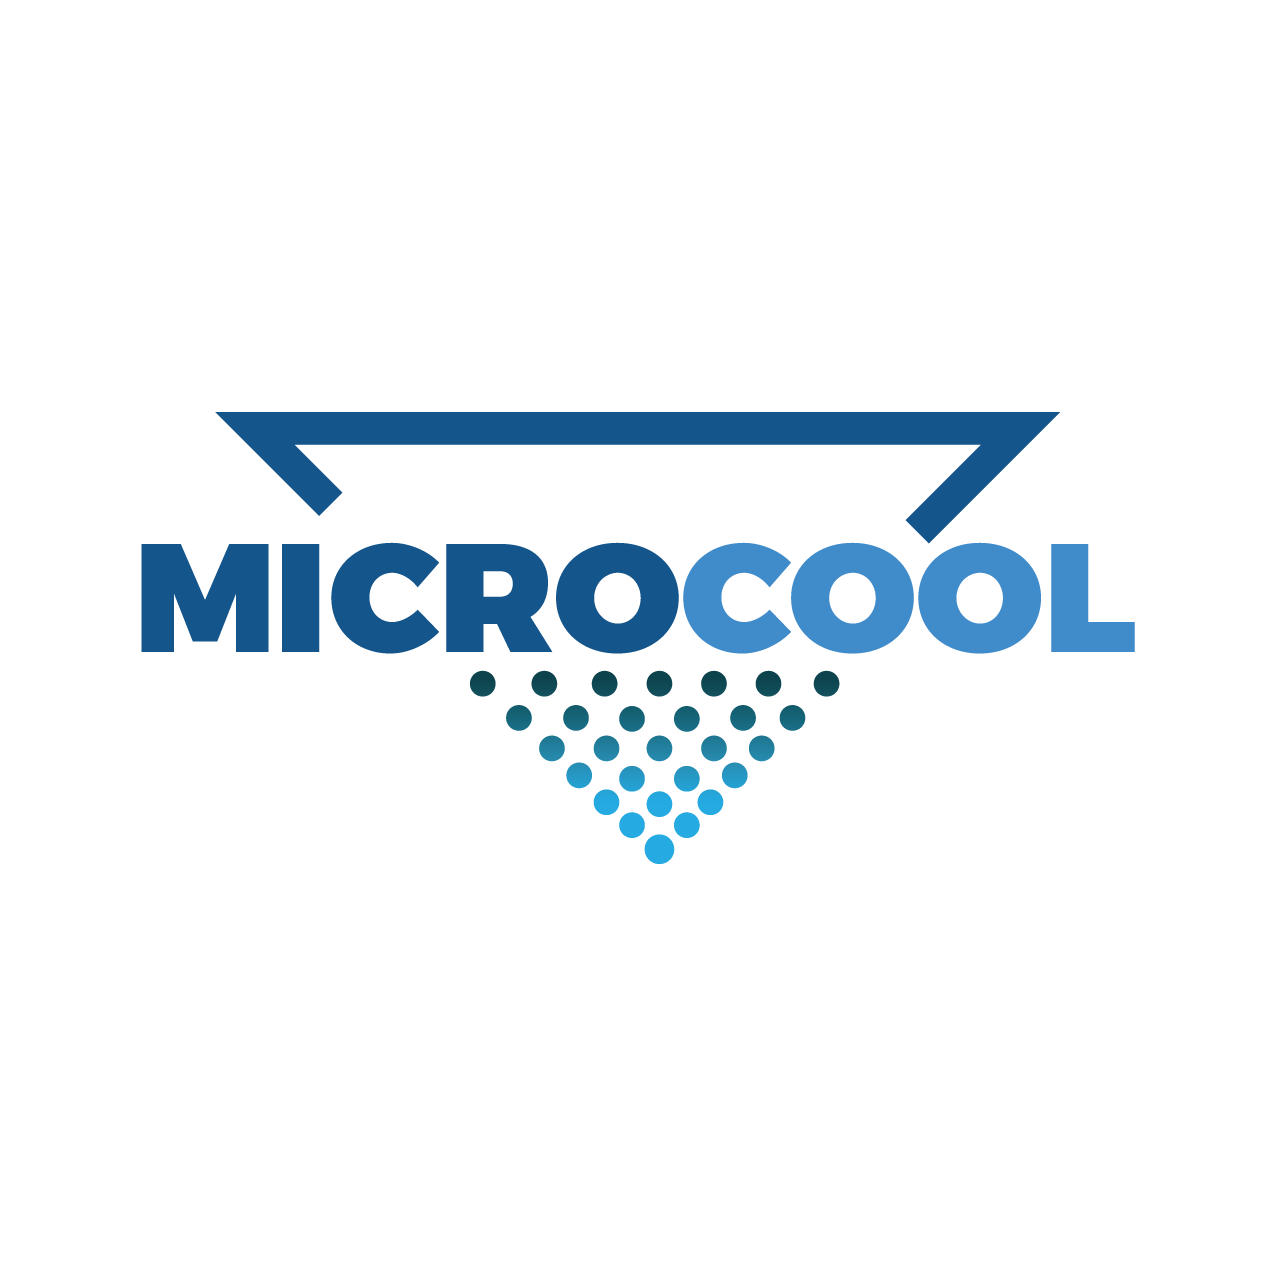 MicroCool and J&D Manufacturing Partner to Transform Dairy Farming with Innovative Evaporative Cooling Systems